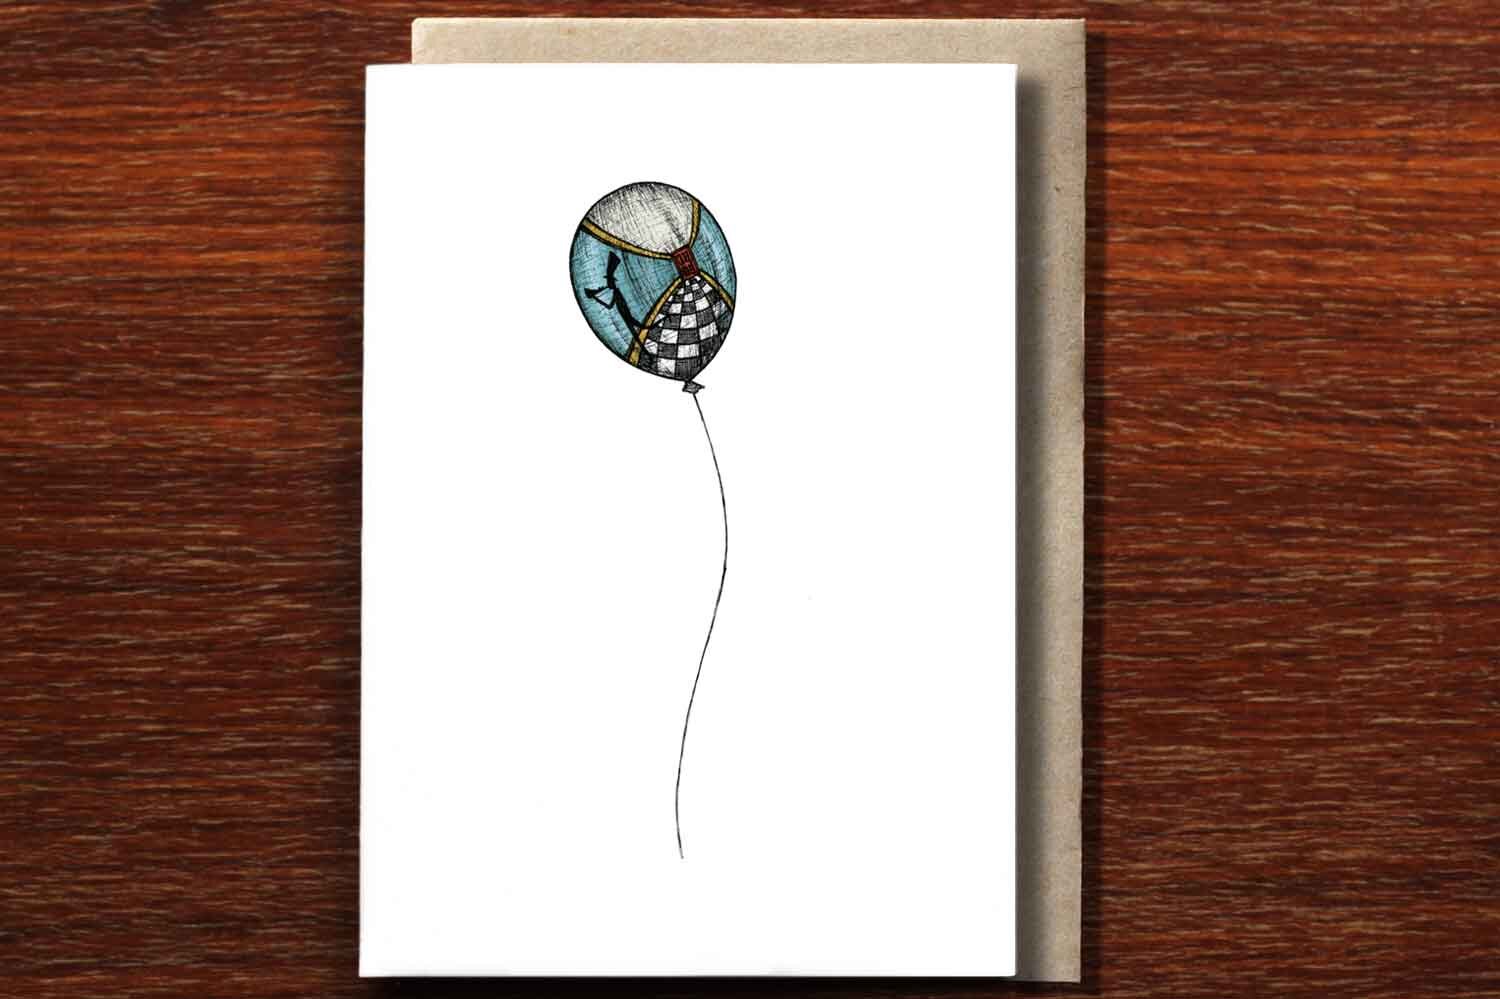 The Man who Lived in a Balloon - Greeting Card